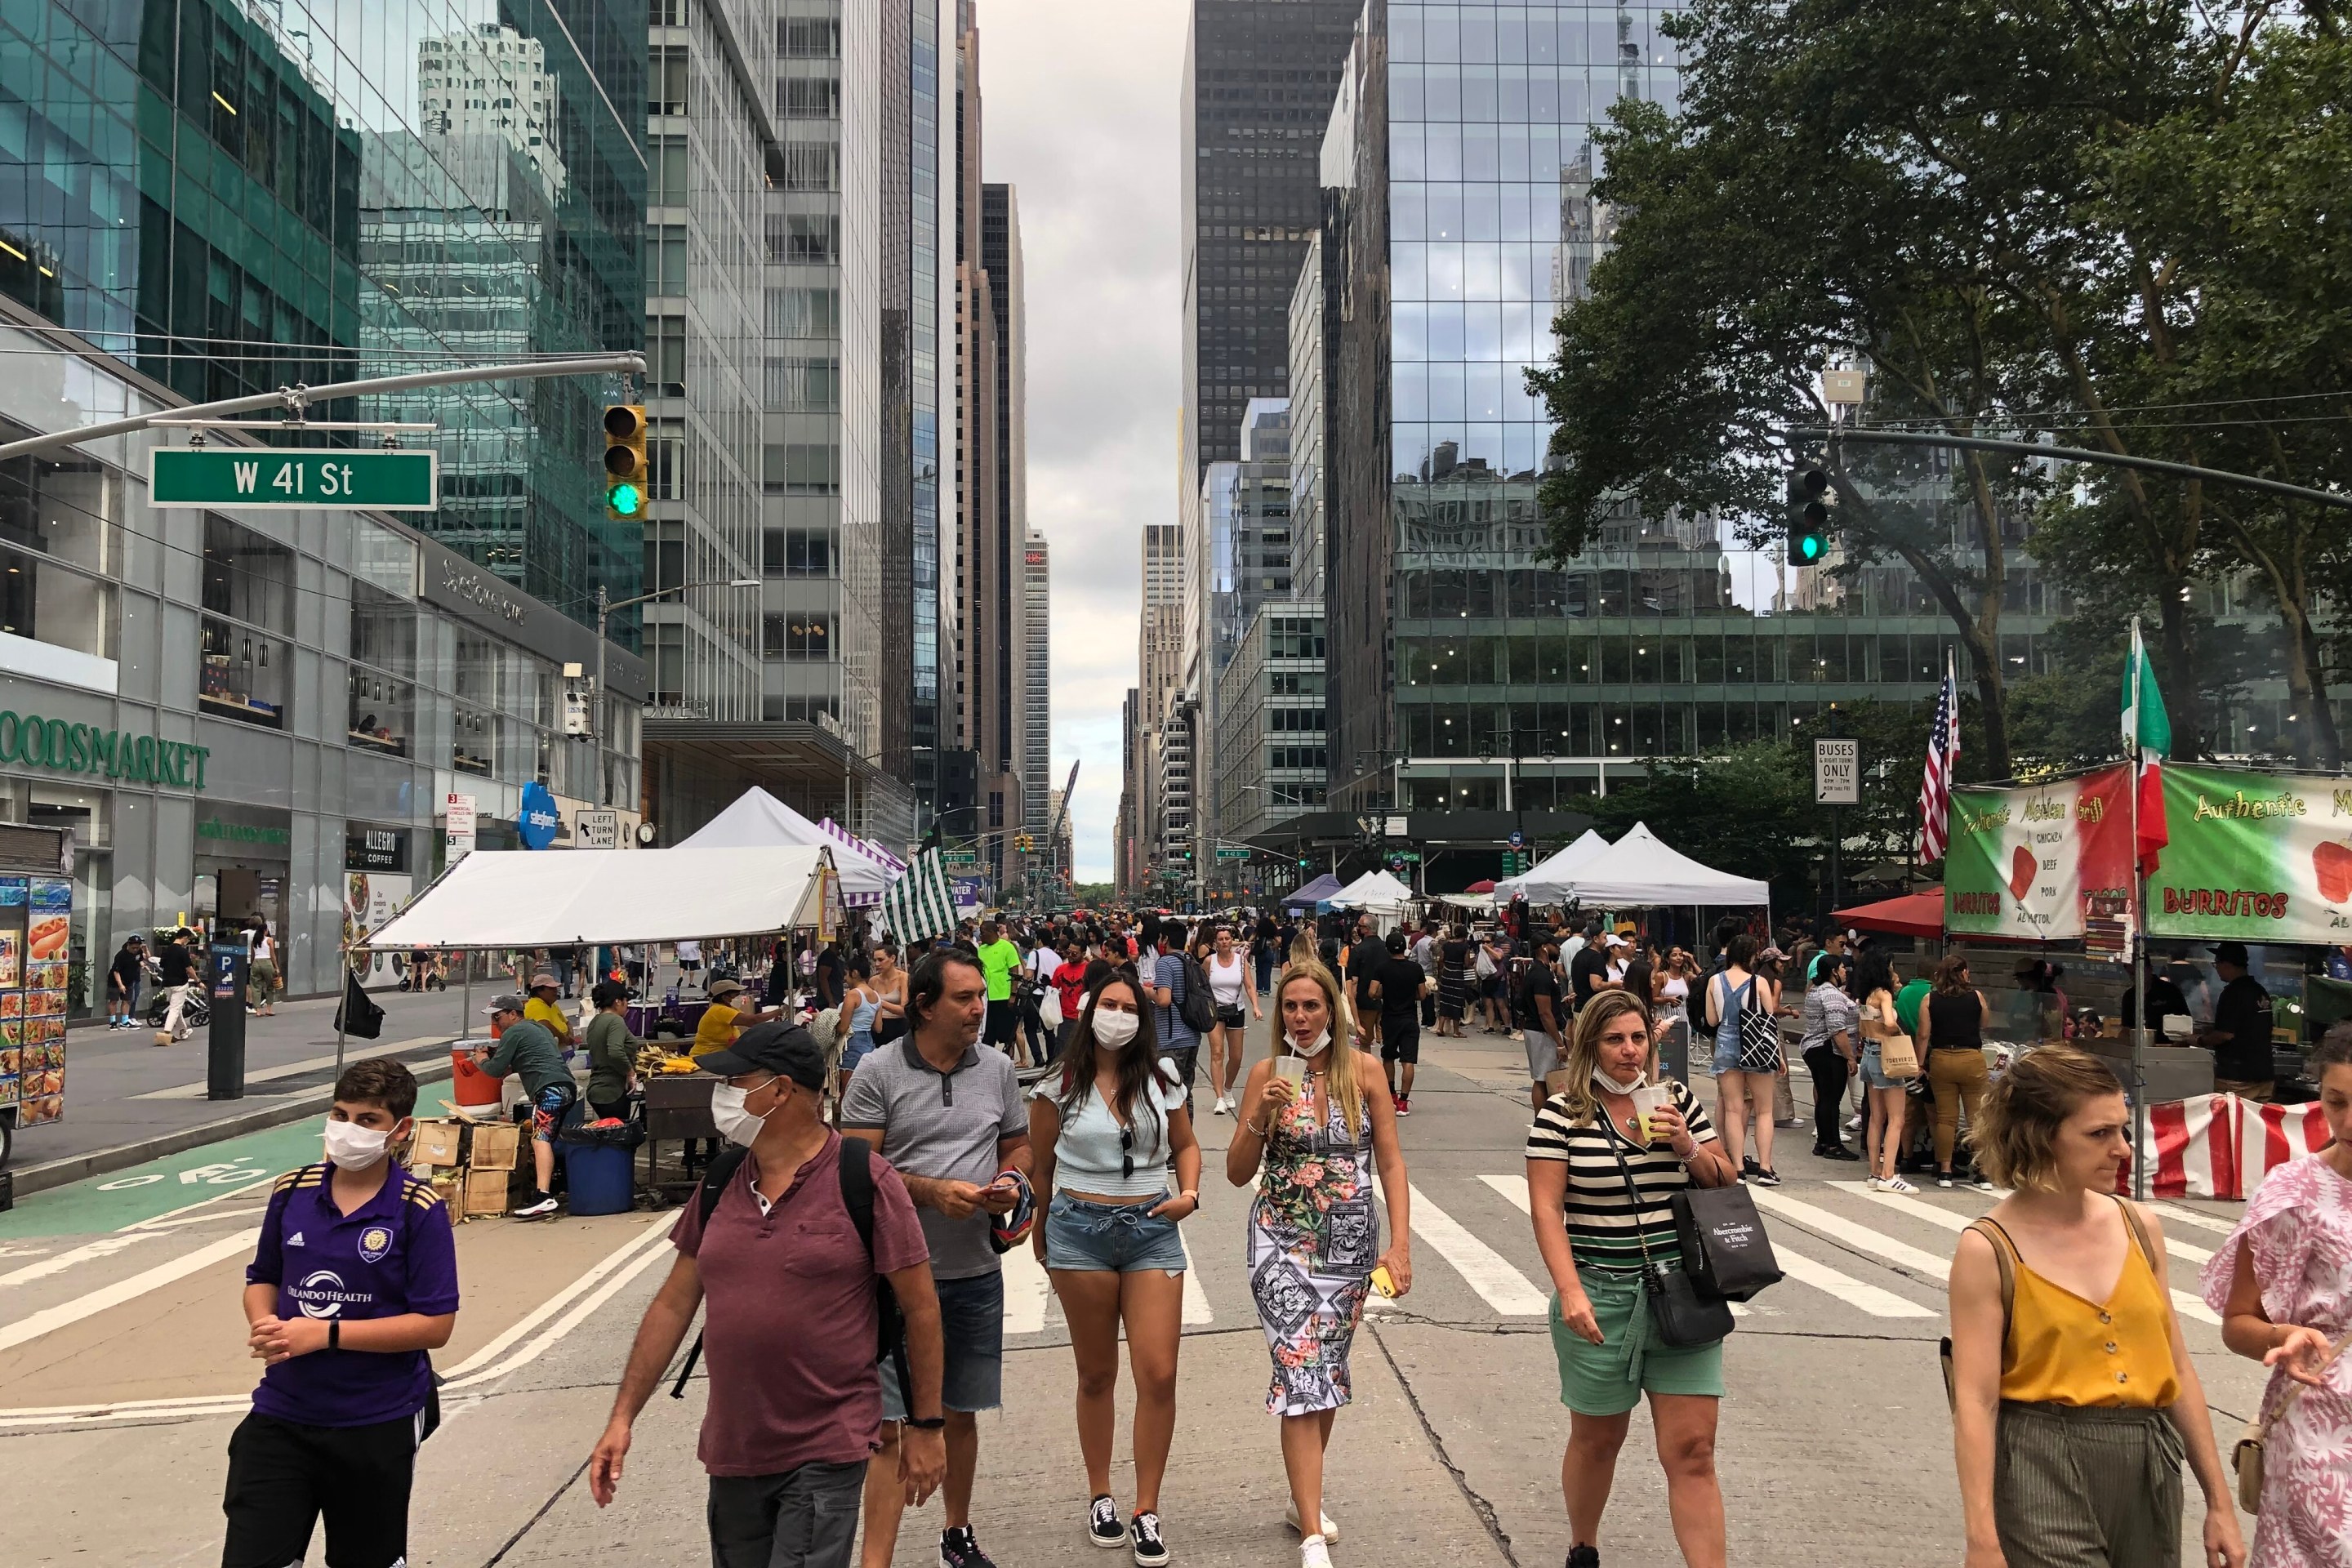 Crowds of people enjoy a street fair on 6th Avenue on July 18th.